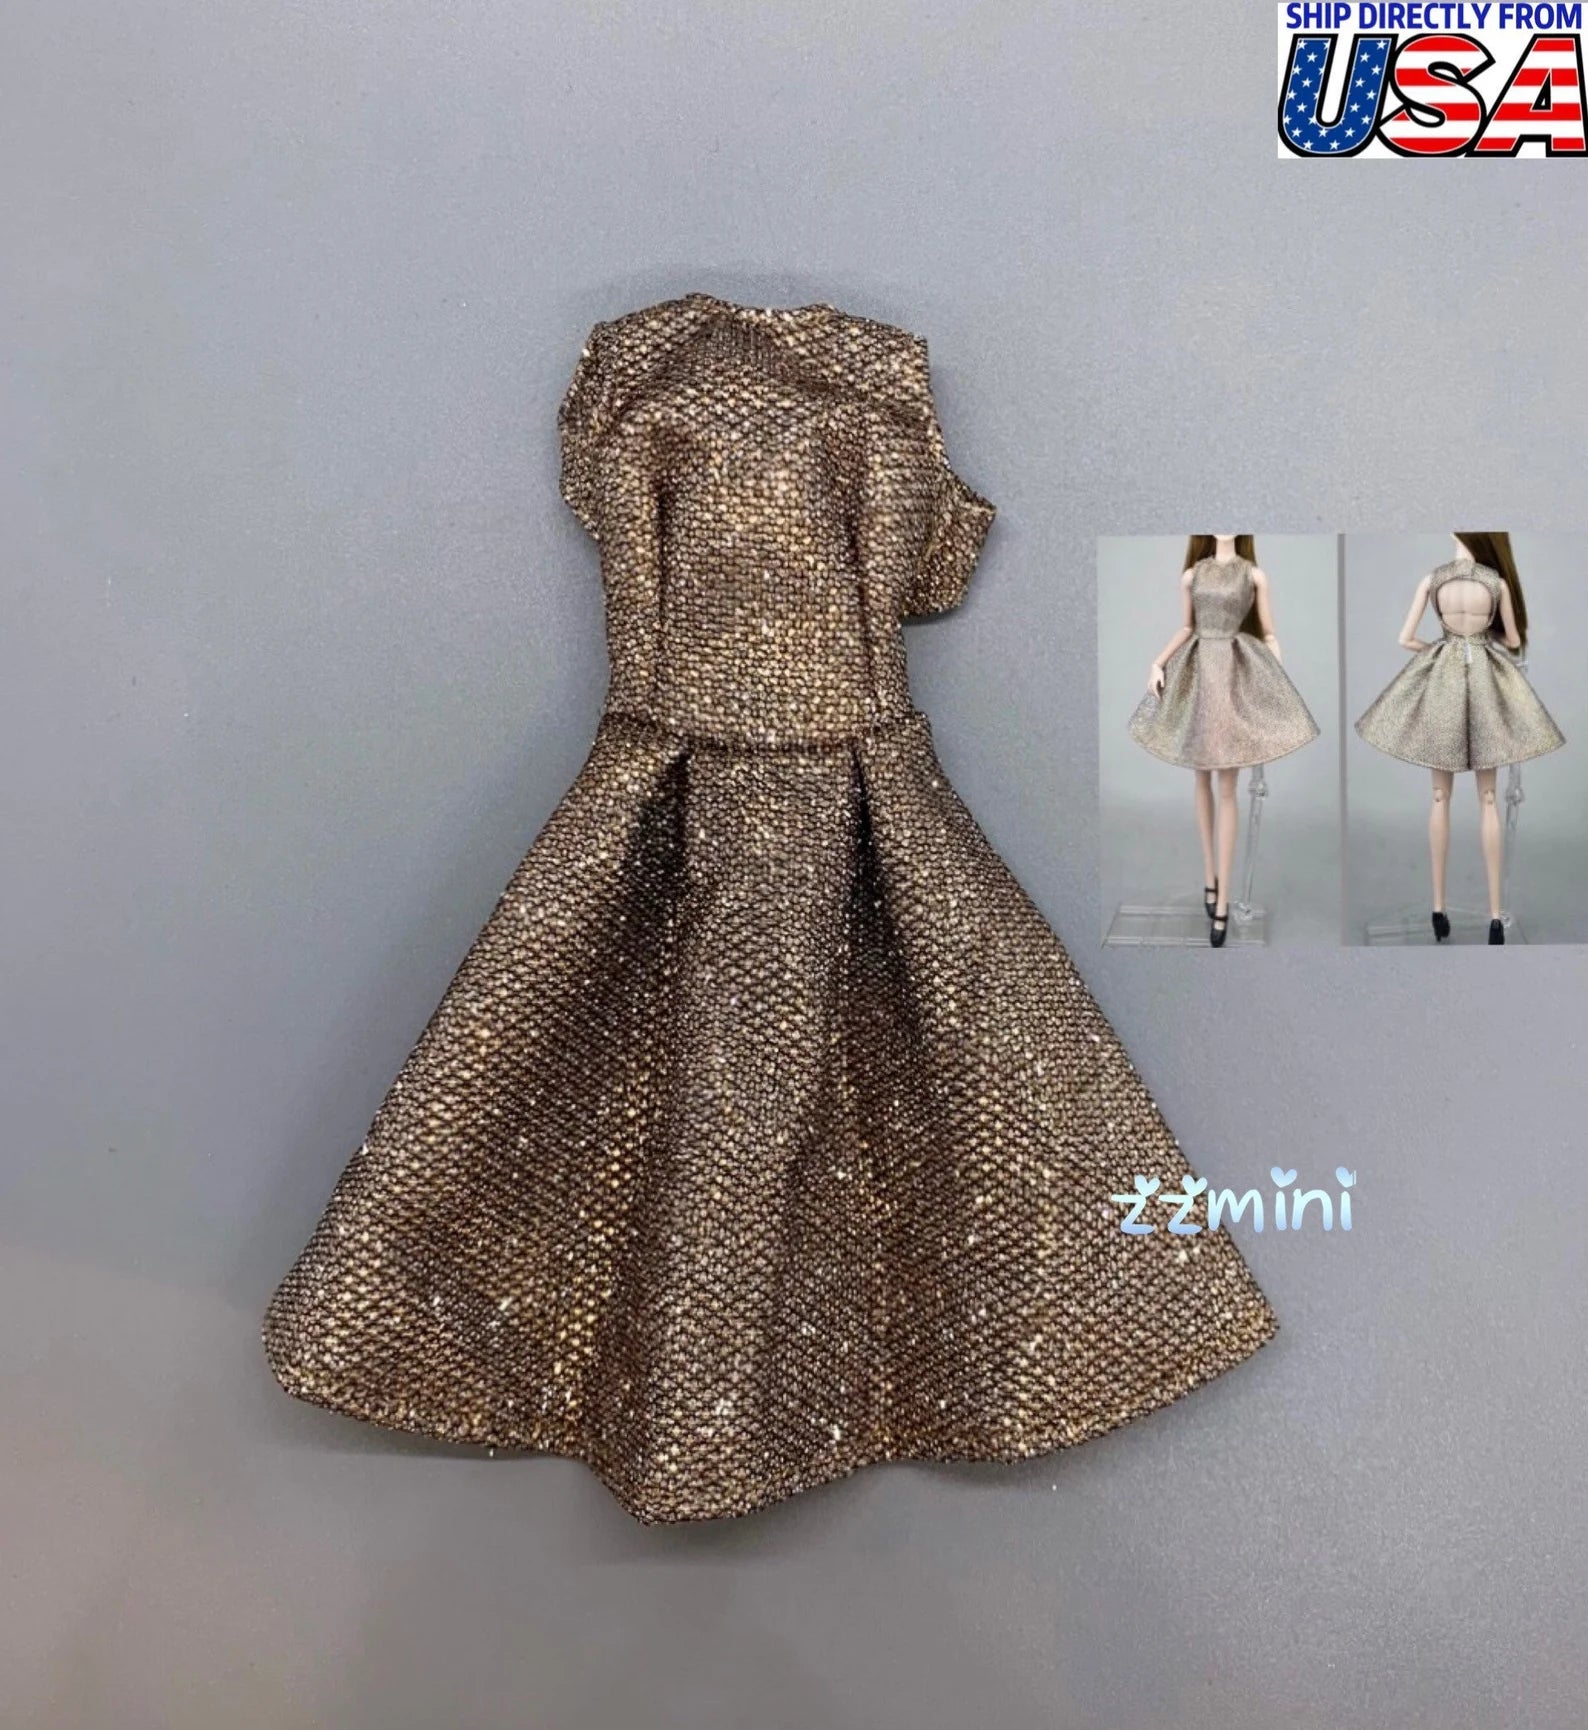 Fashion Doll Little Dress Classical Evening Dress Clothes for 11.5" Doll